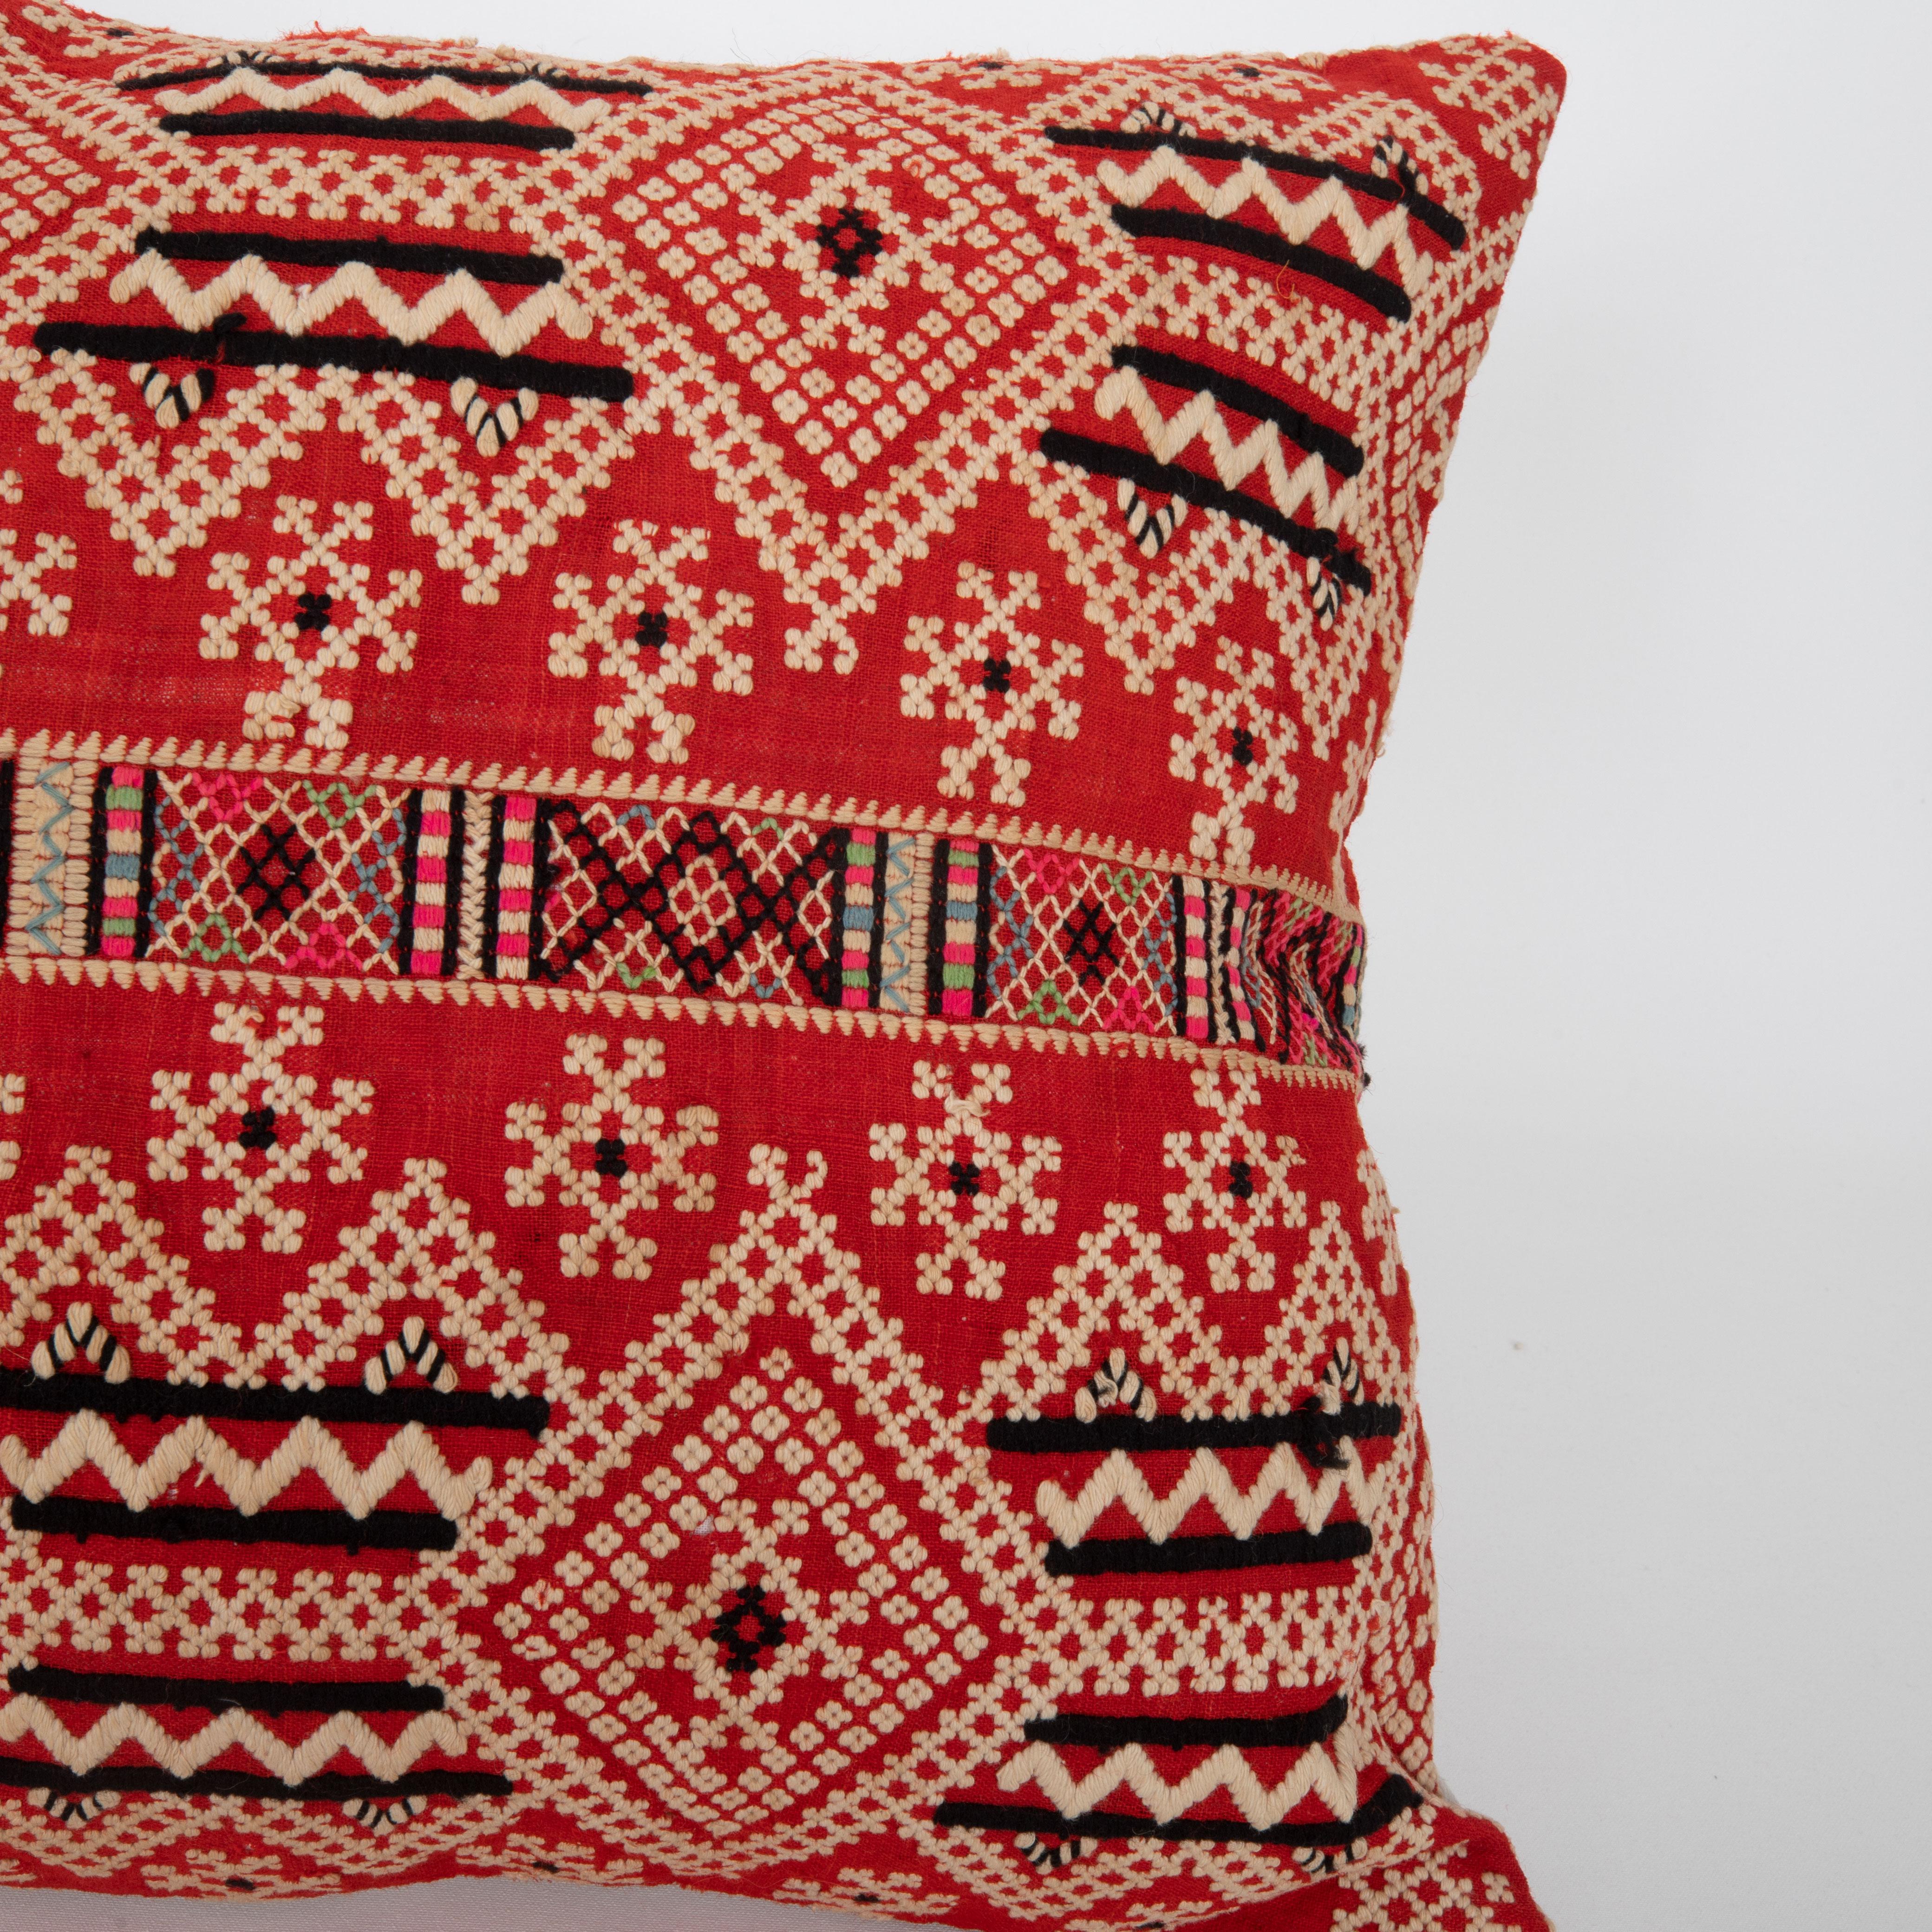 Embroidered Pillow Case Made From an Mid 20th C Eastern European Apron For Sale